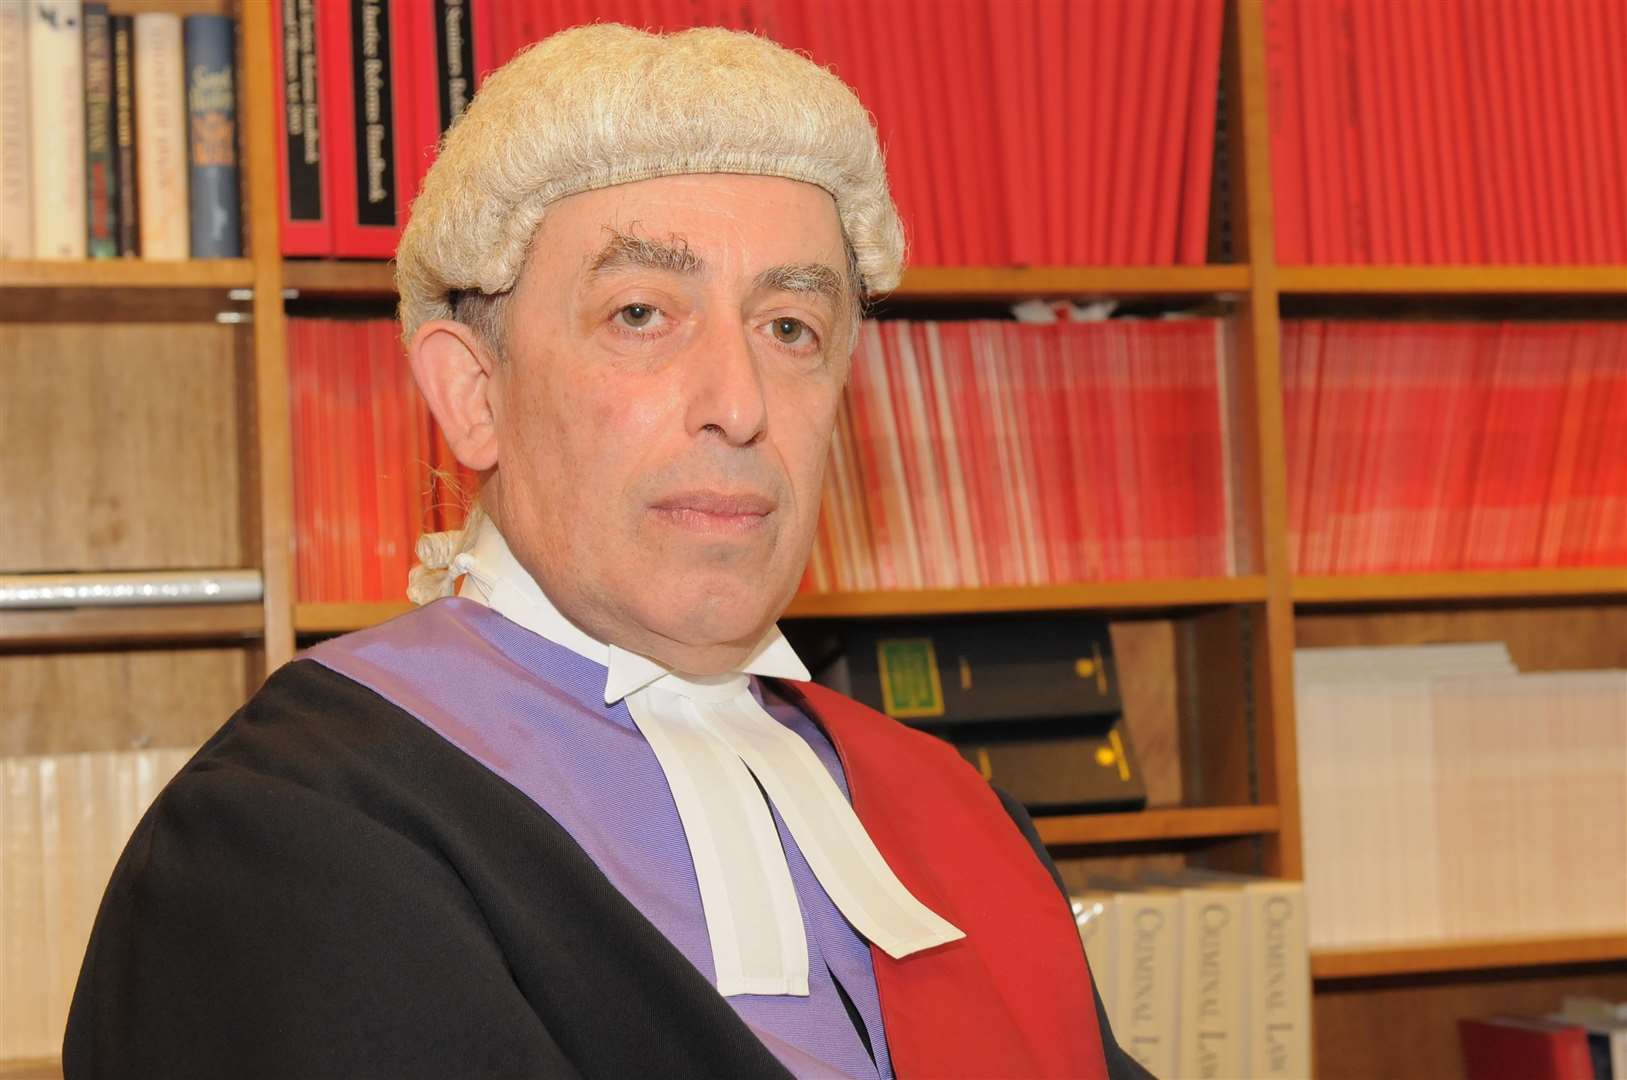 Judge Philip Statman said: "Your victim did absolutely nothing to in anyway provoke you." Picture: Steve Crispe